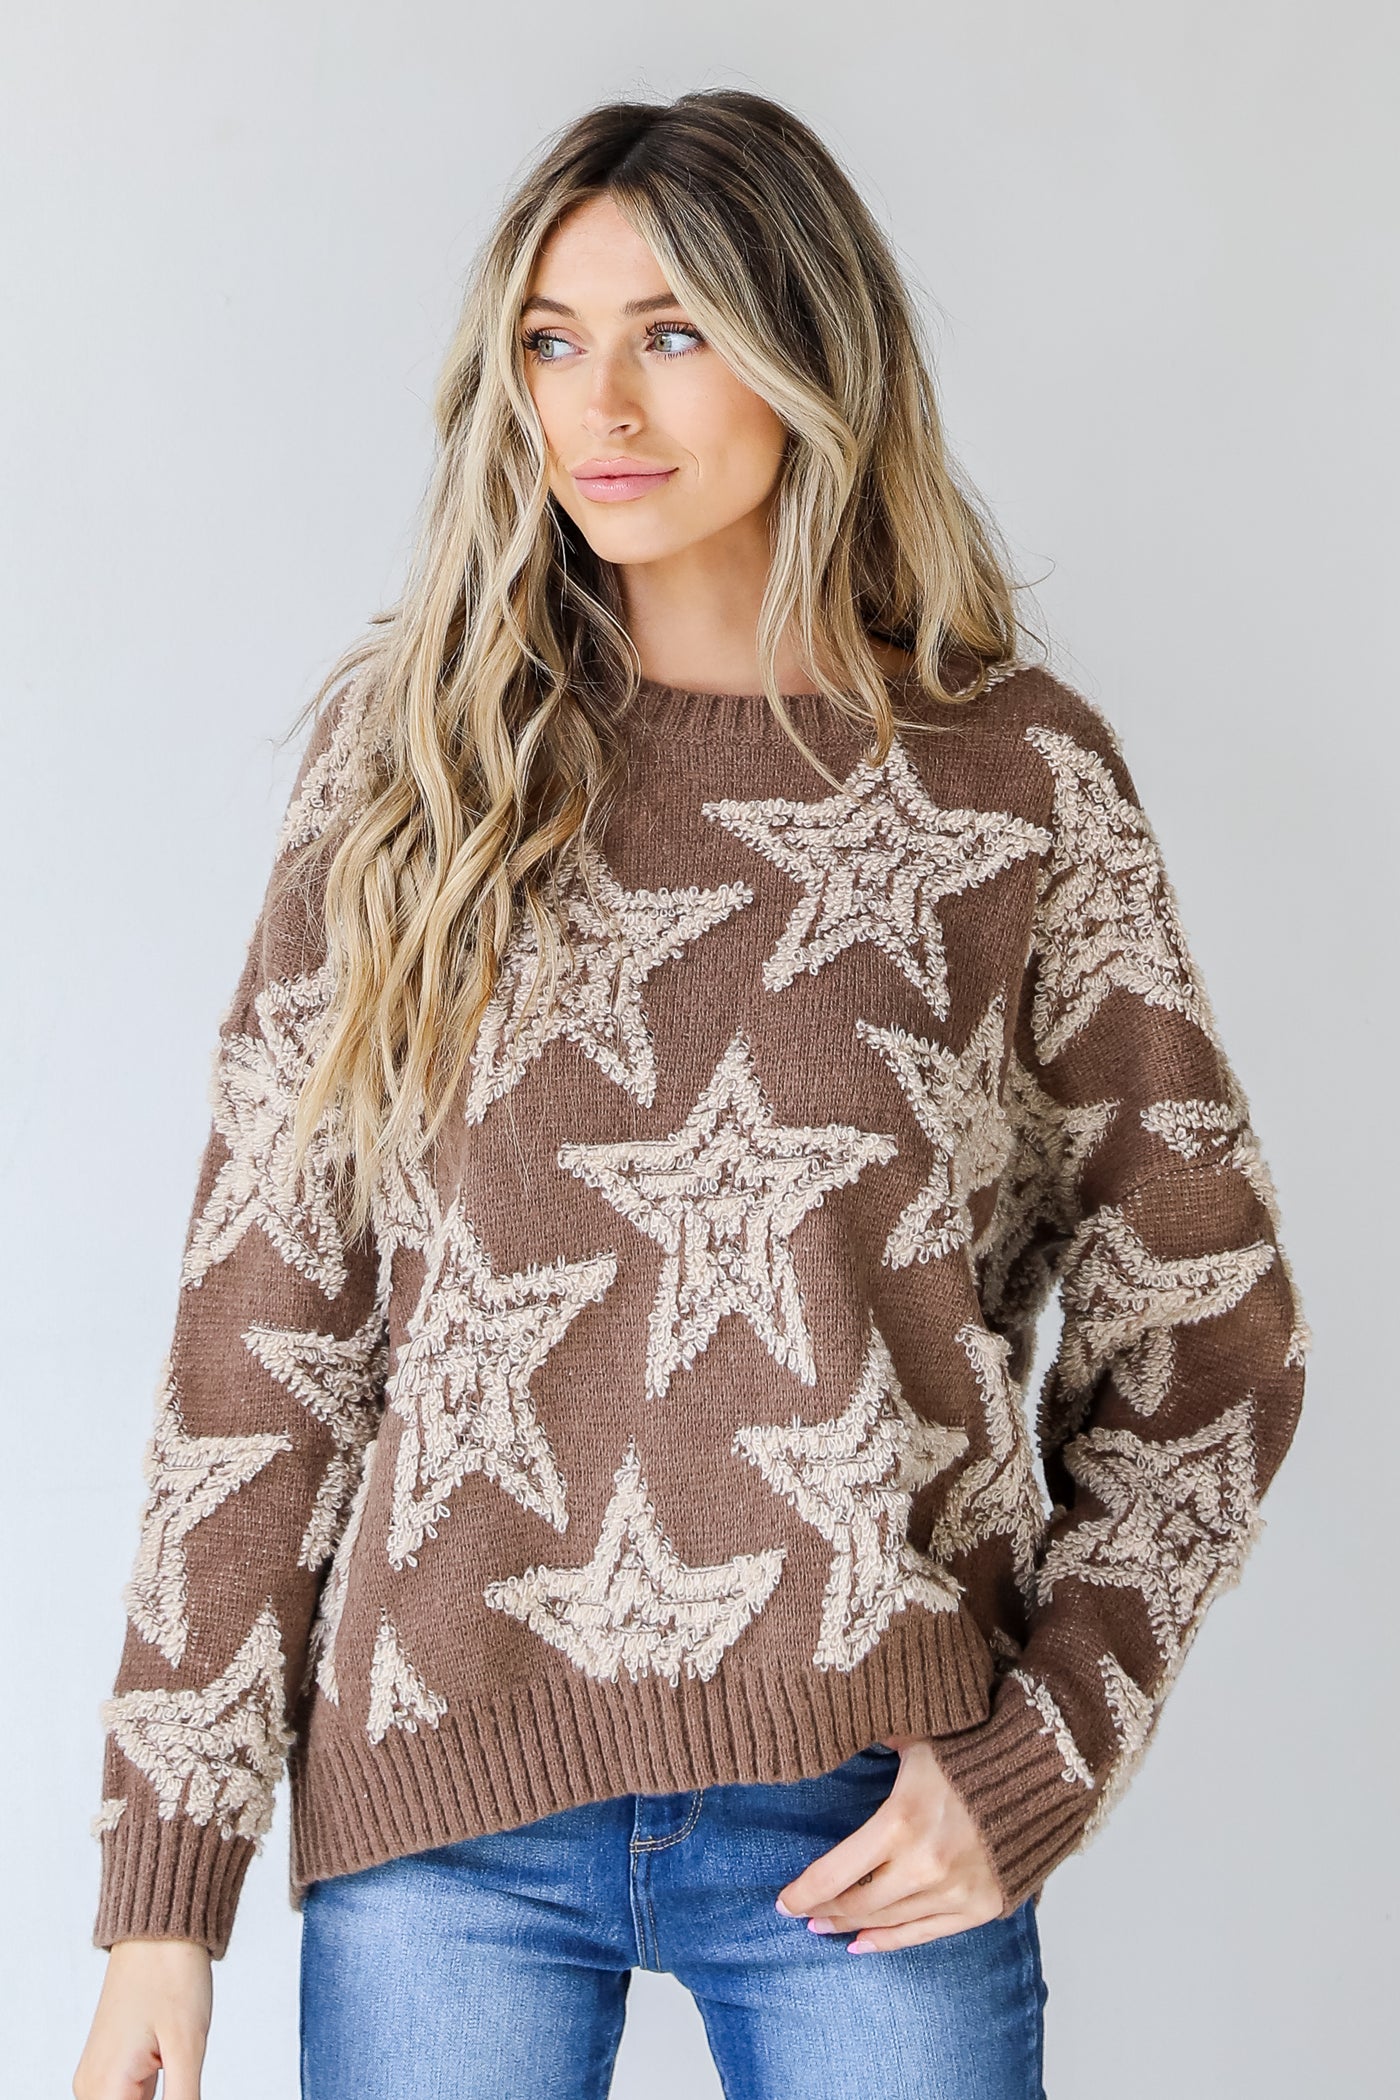 Stars Sweater front view